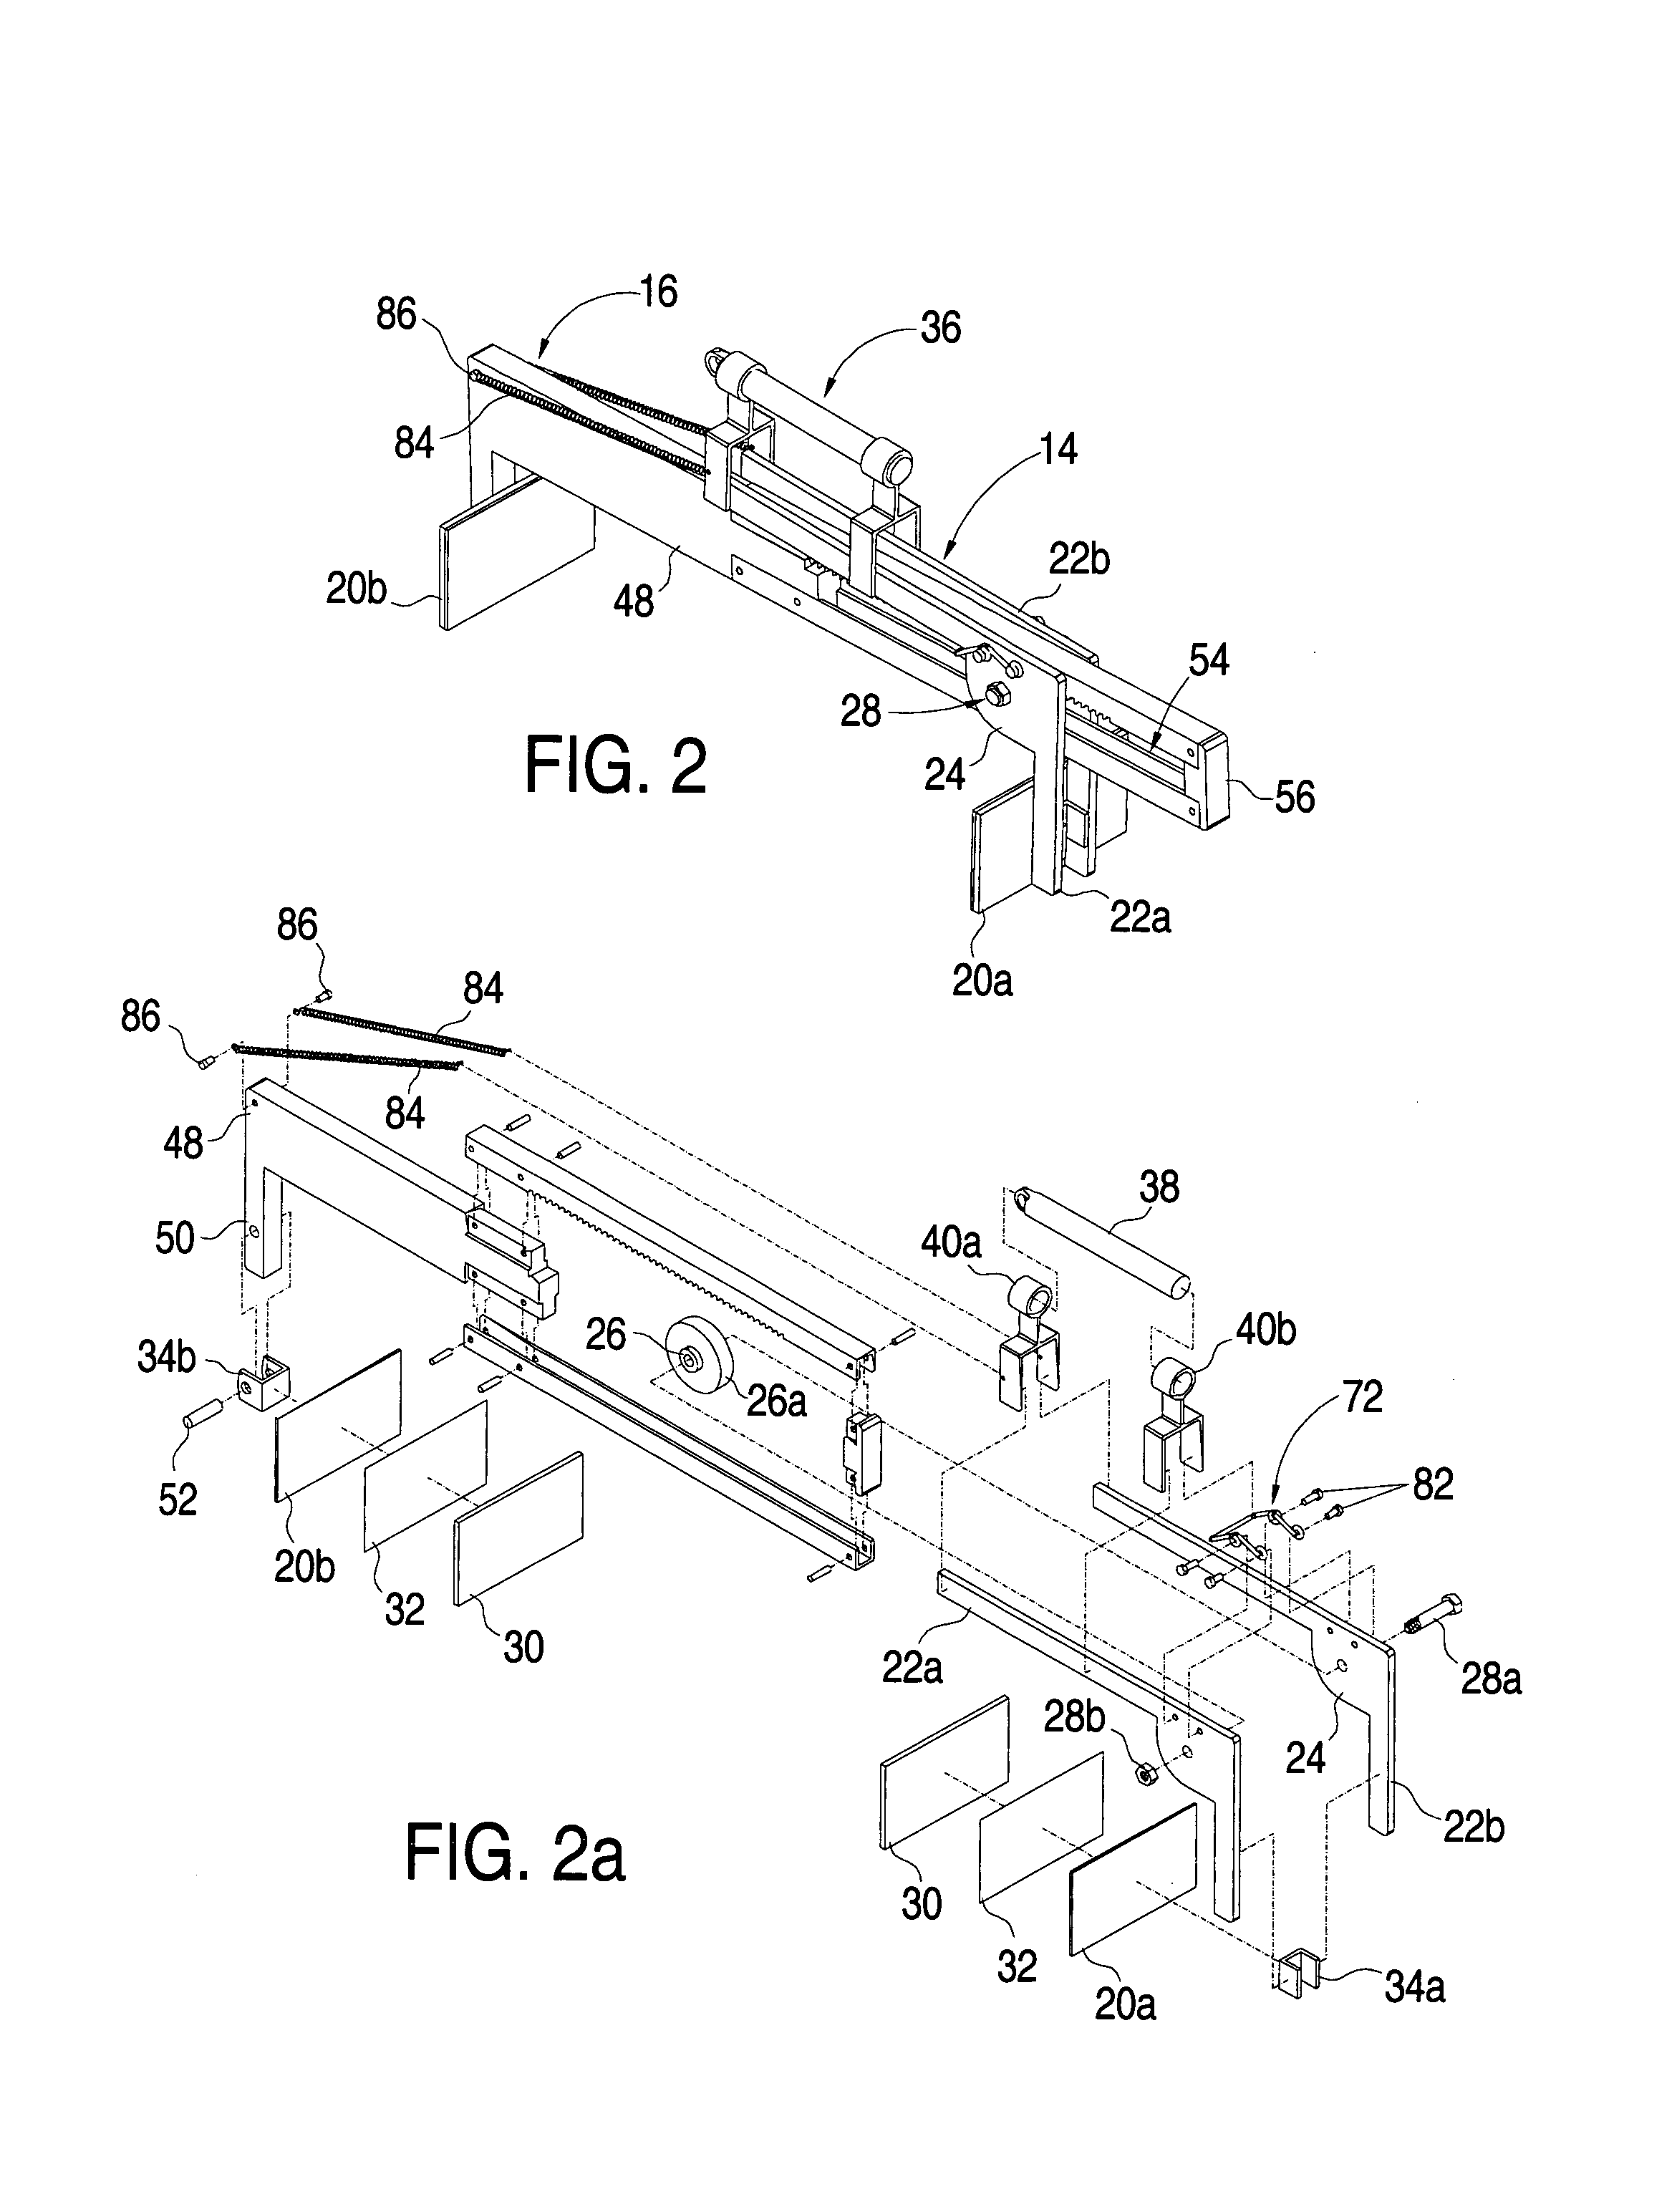 Single hand operated adjustable carrying device and method of use thereof